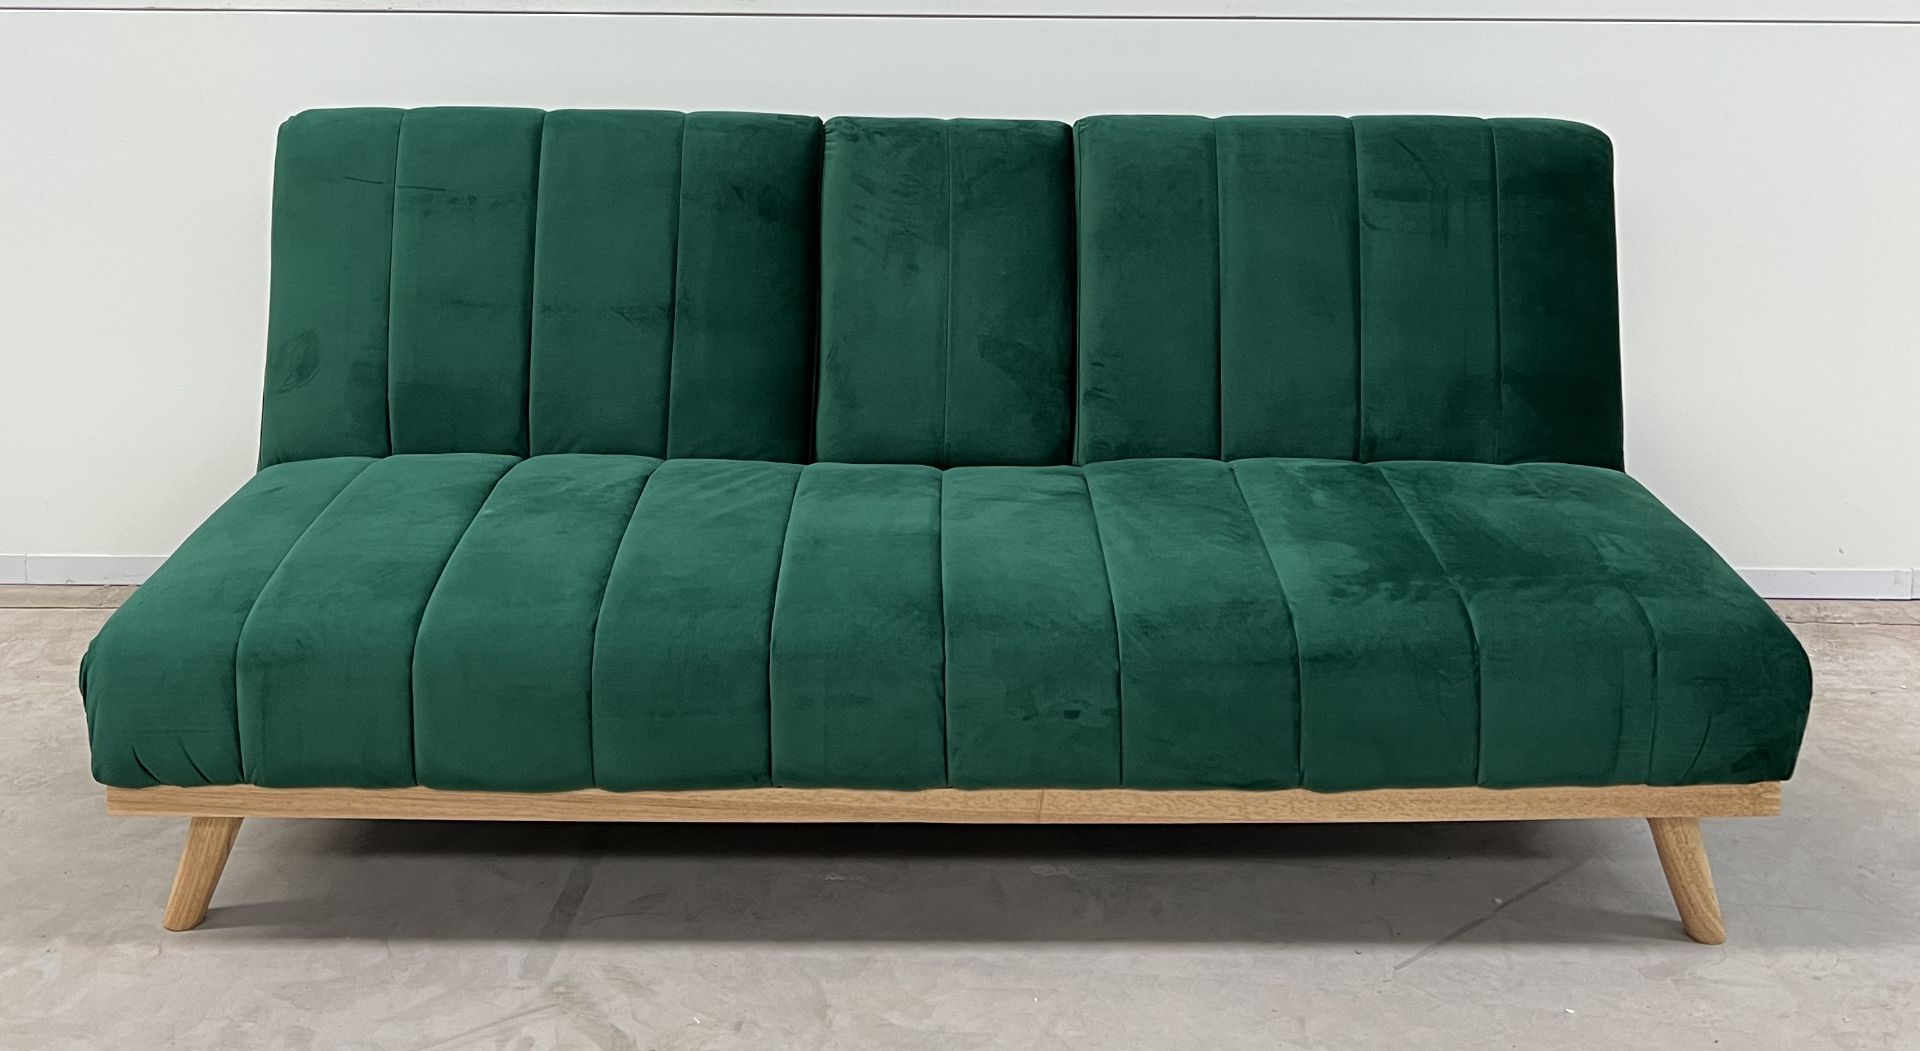 Etta Green Plush Velvet Sofa Bed Defined By It's Soft Curves And Low Rise Design As Well As Subtle